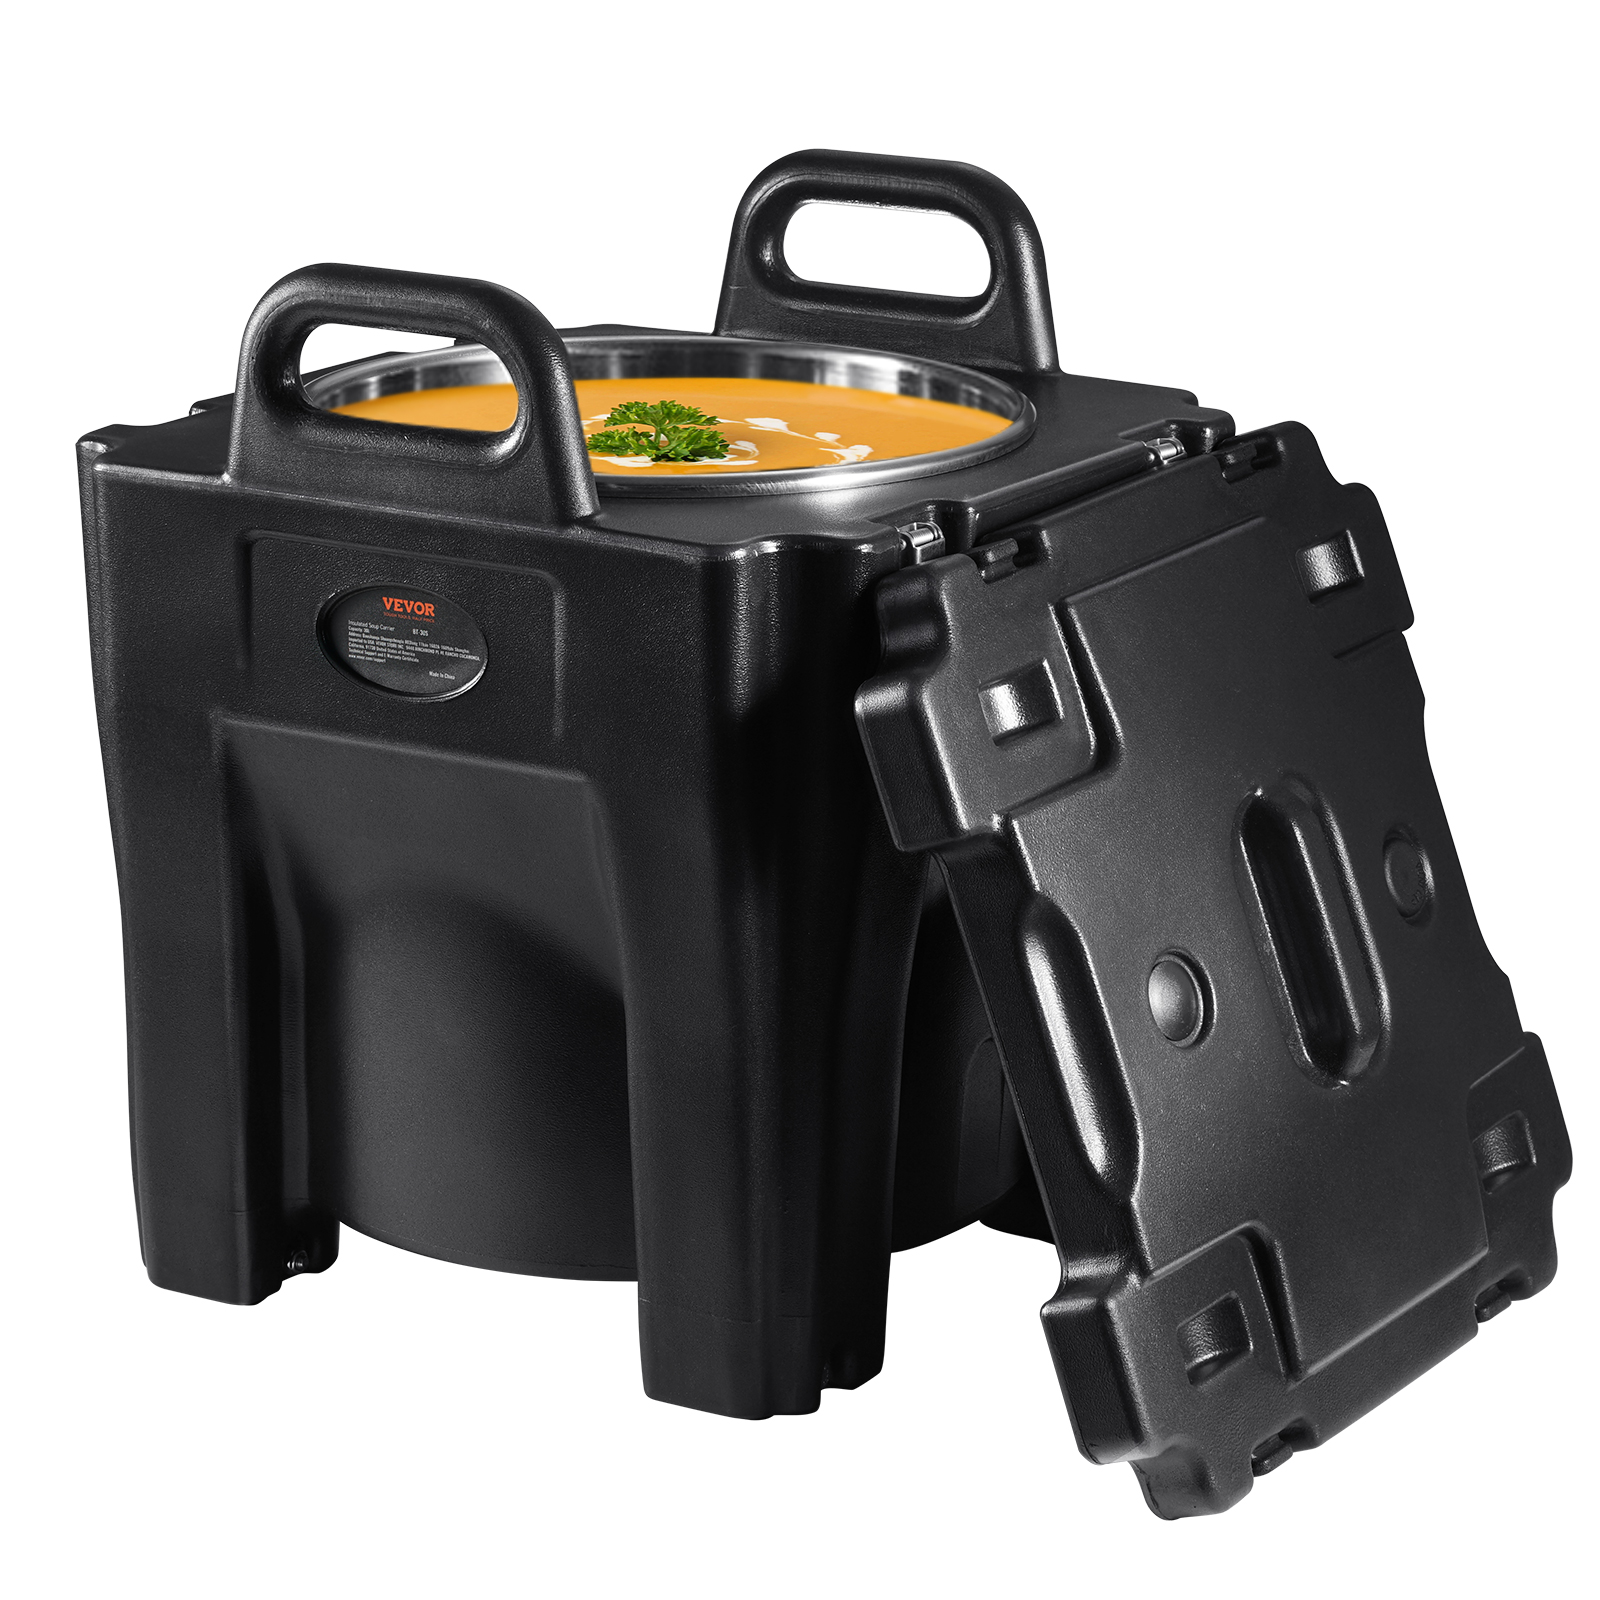 https://d2qc09rl1gfuof.cloudfront.net/product/SPBWXHSBWT30LBMYX/insulated-food-pan-carrier-m100-1.2.jpg